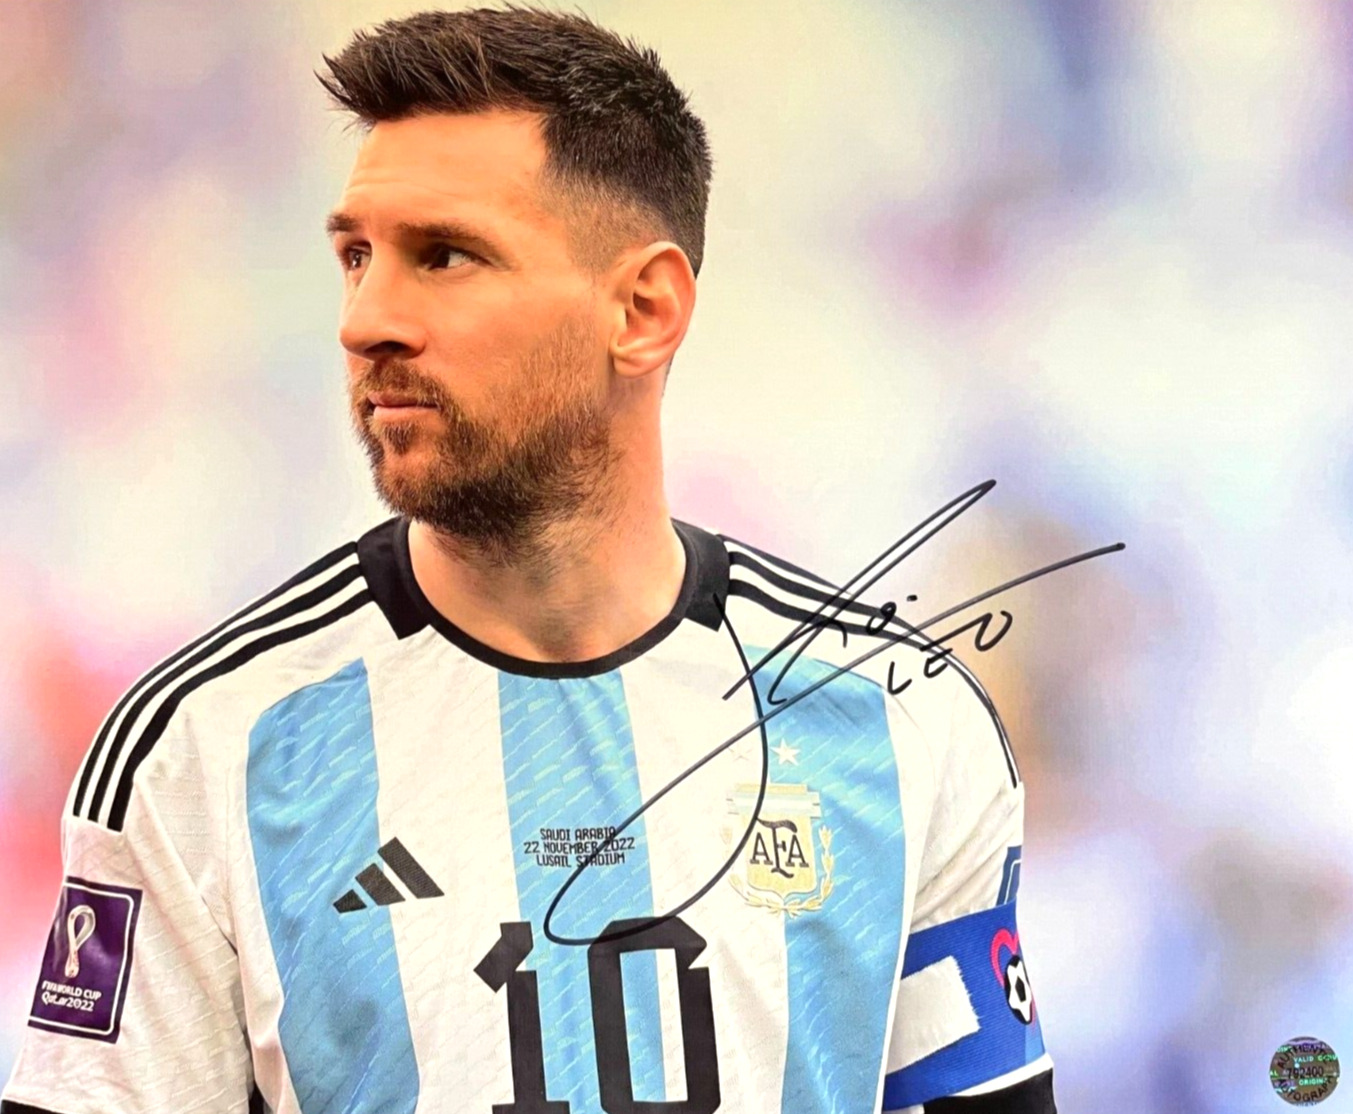 LIONEL MESSI Signed [Argentina: World Cup] 8x10